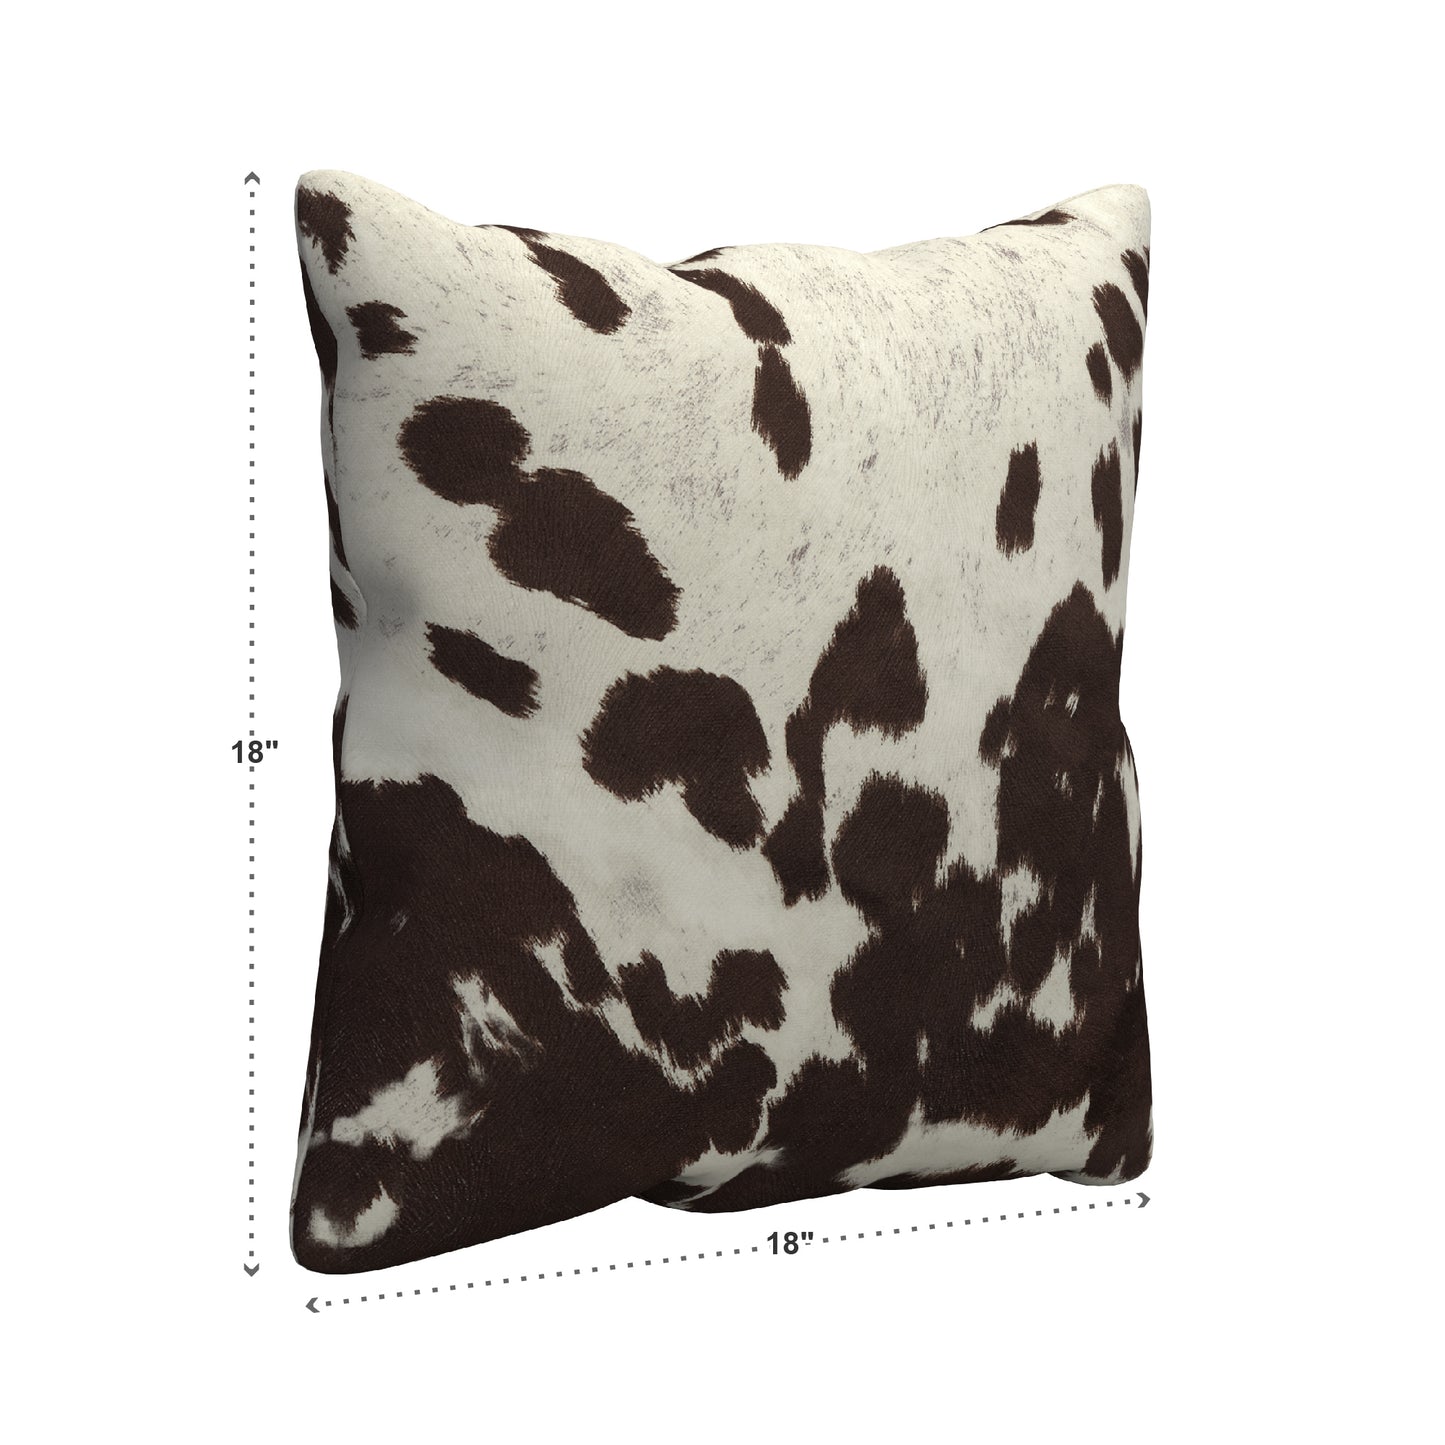 Faux Cowhide Print Accent Pillows (Set of 2) - Brown Cowhide